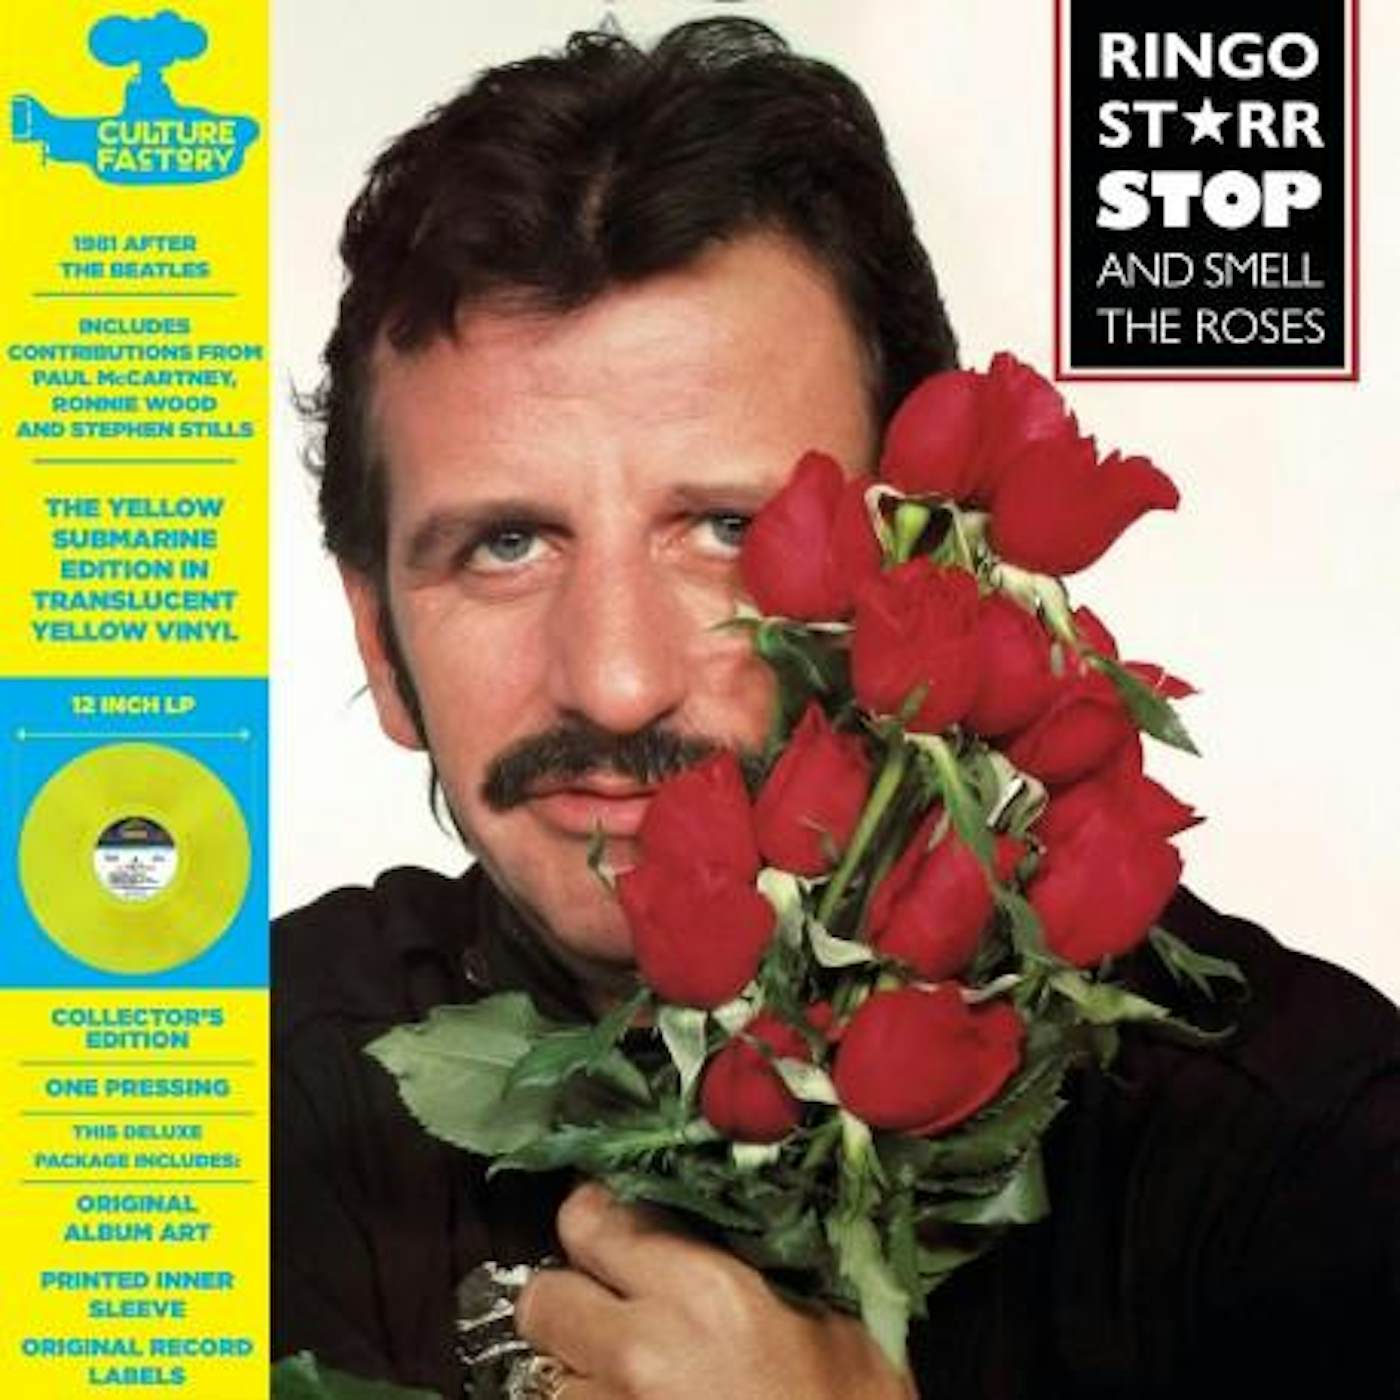 Ringo Starr Stop & Smell The Roses: Yellow Submarine Edition (Yellow) Vinyl Record